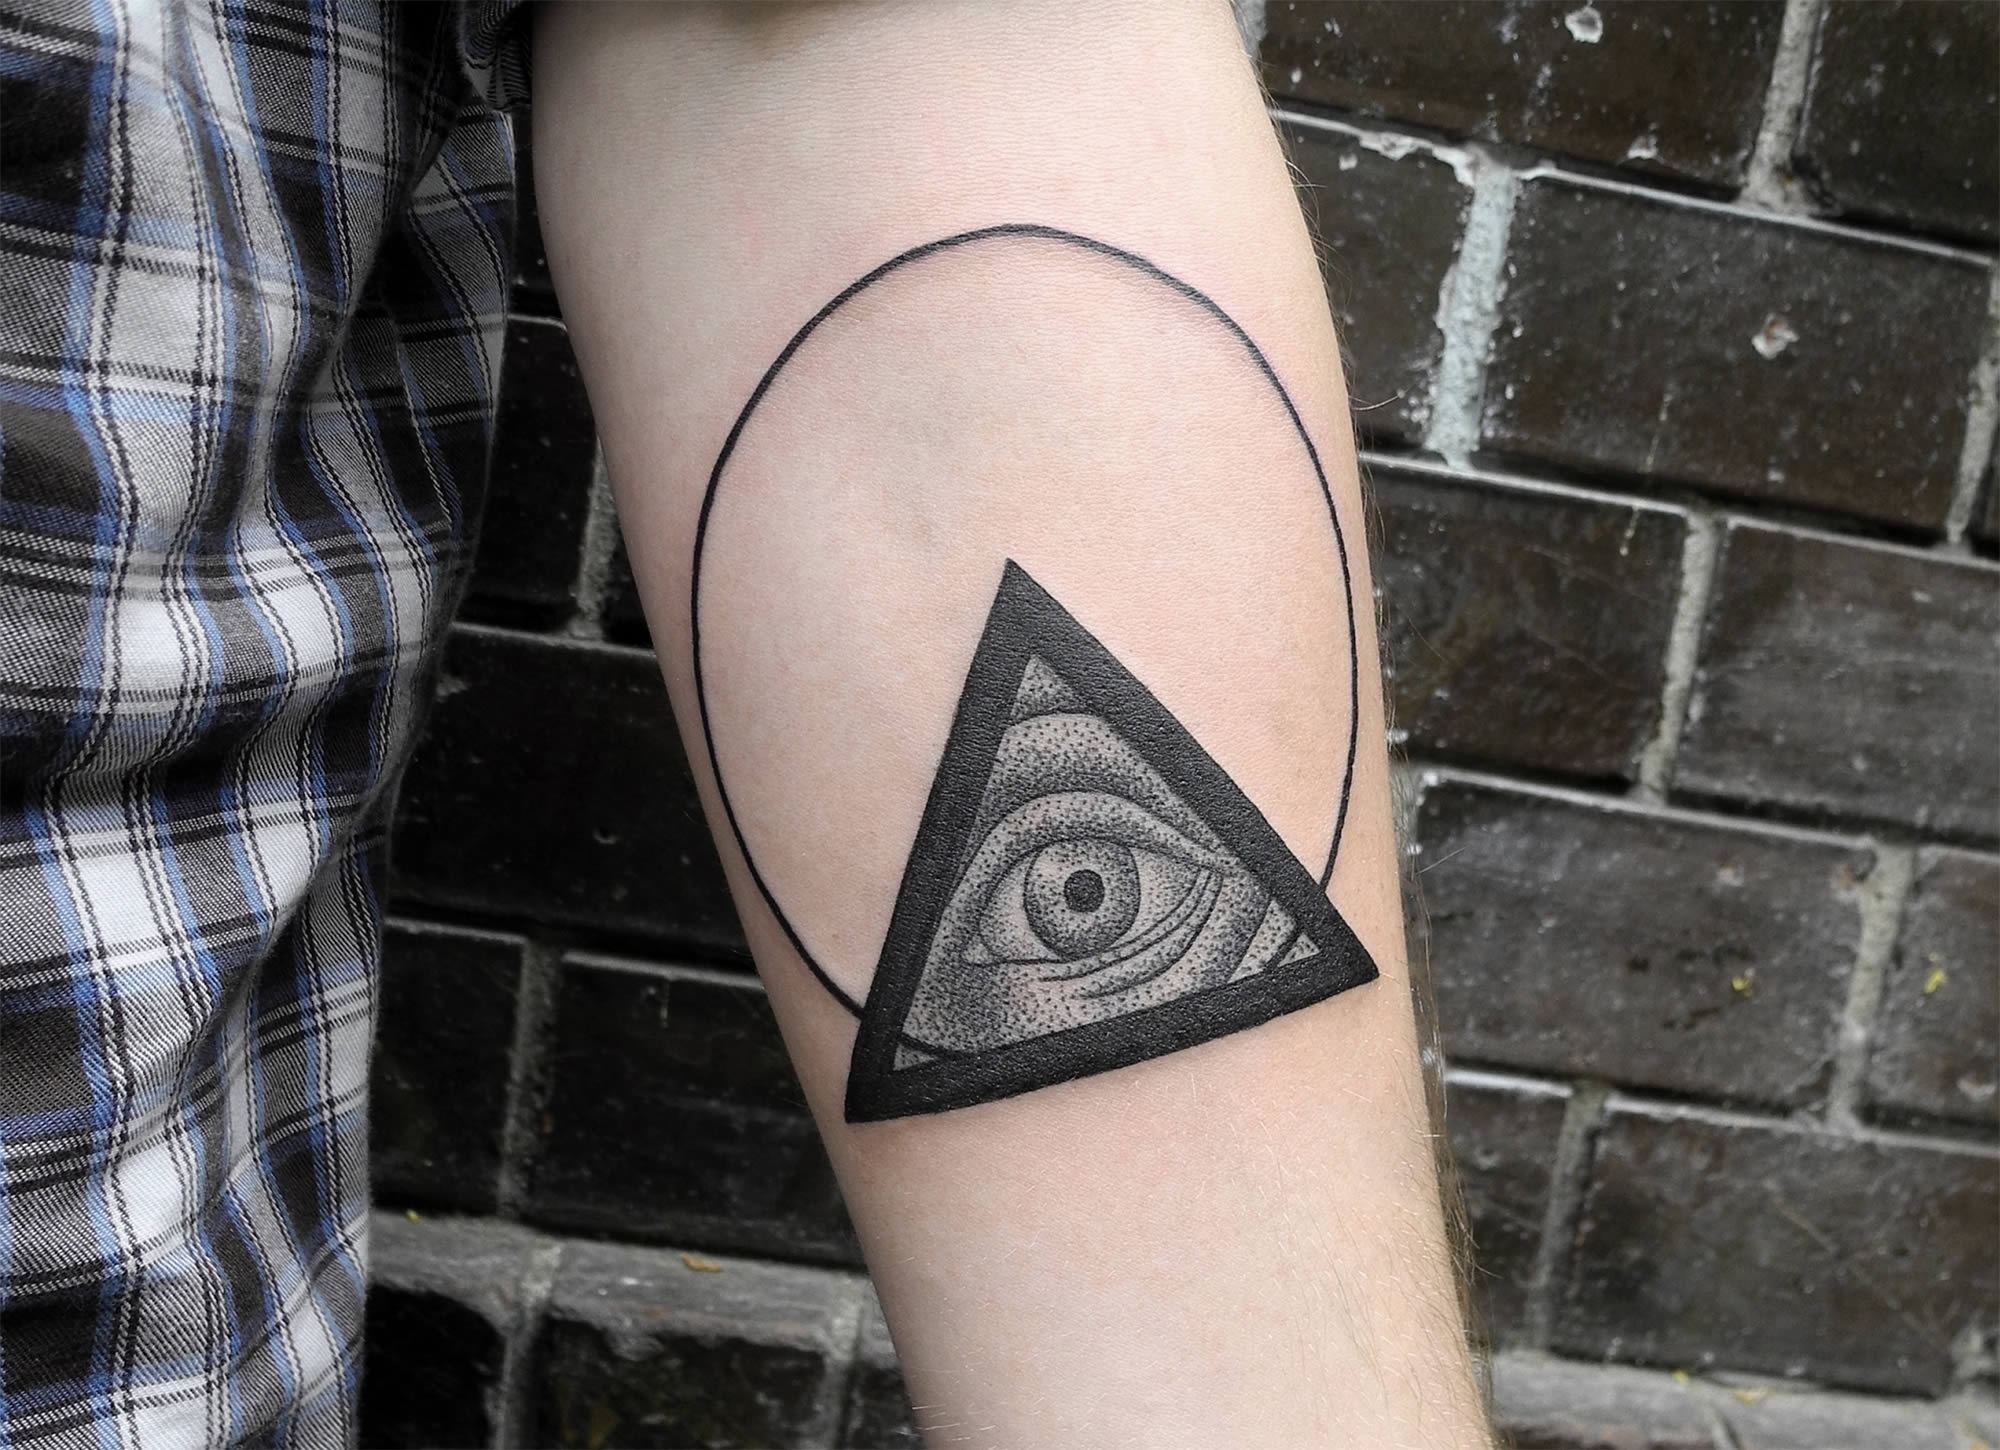 Tattoos of the Mighty “Eye of Providence” | Scene360